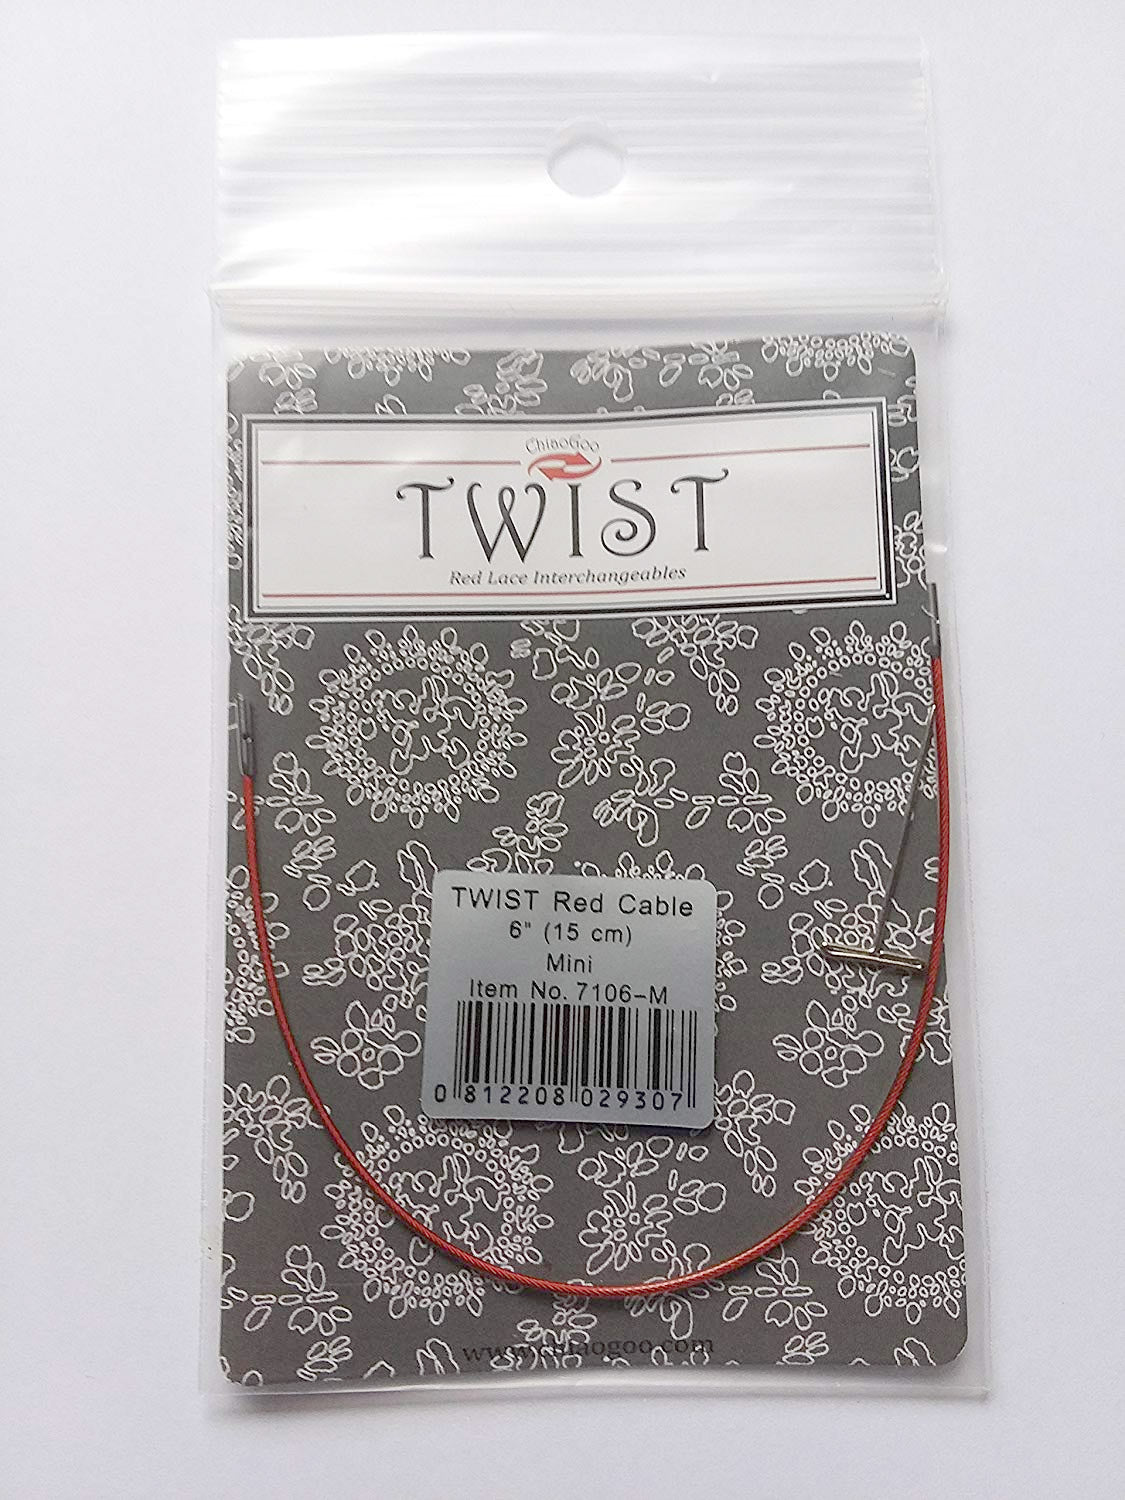 ChiaoGoo TWIST- [M] Mini Interchangeable Red Cables - For US-000 (1.5 mm) to US-1.5 (2.5 mm) Tips